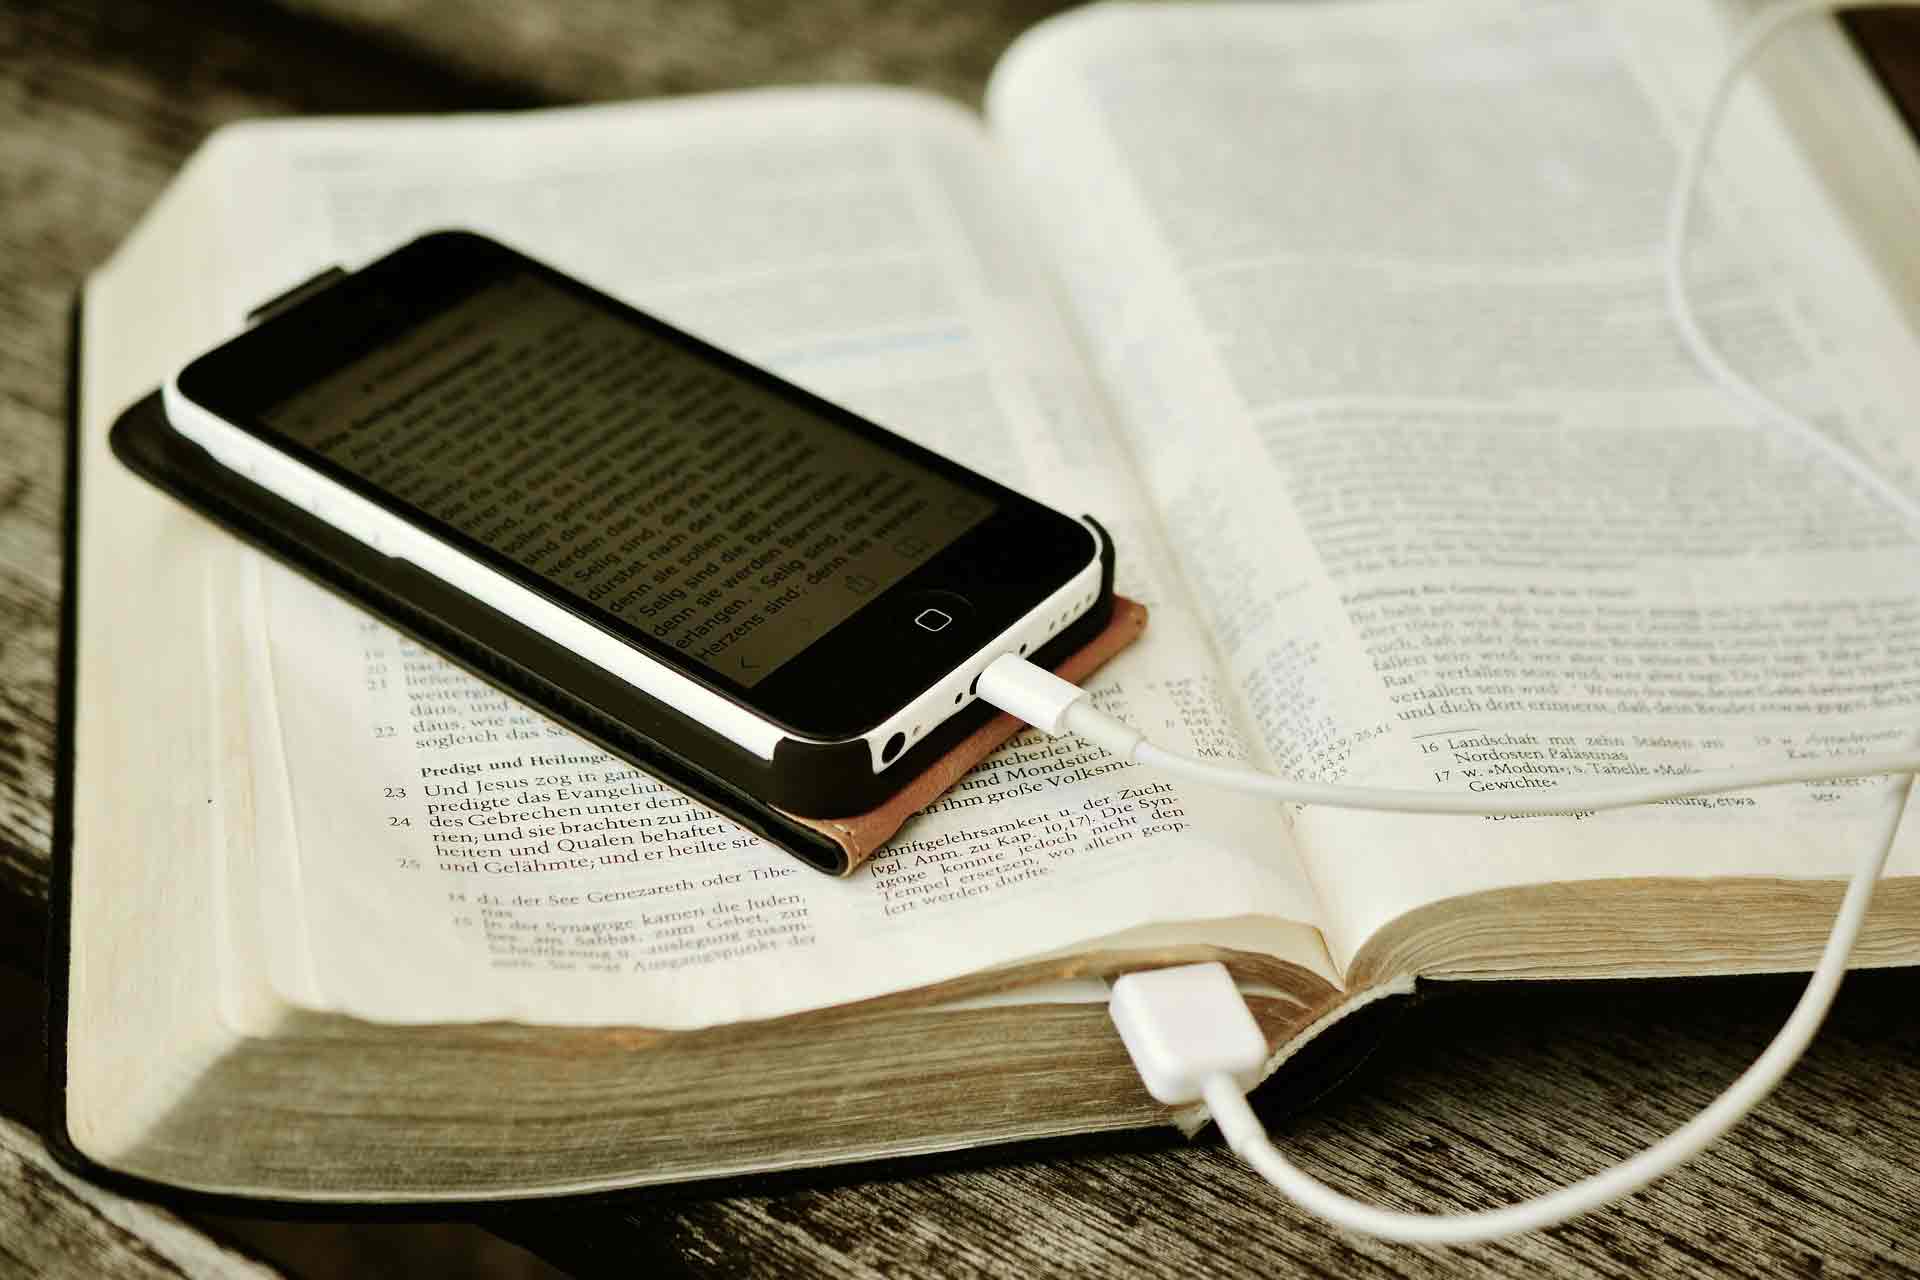 Best Jesus Apps in 2022 To Live A Faithful Life